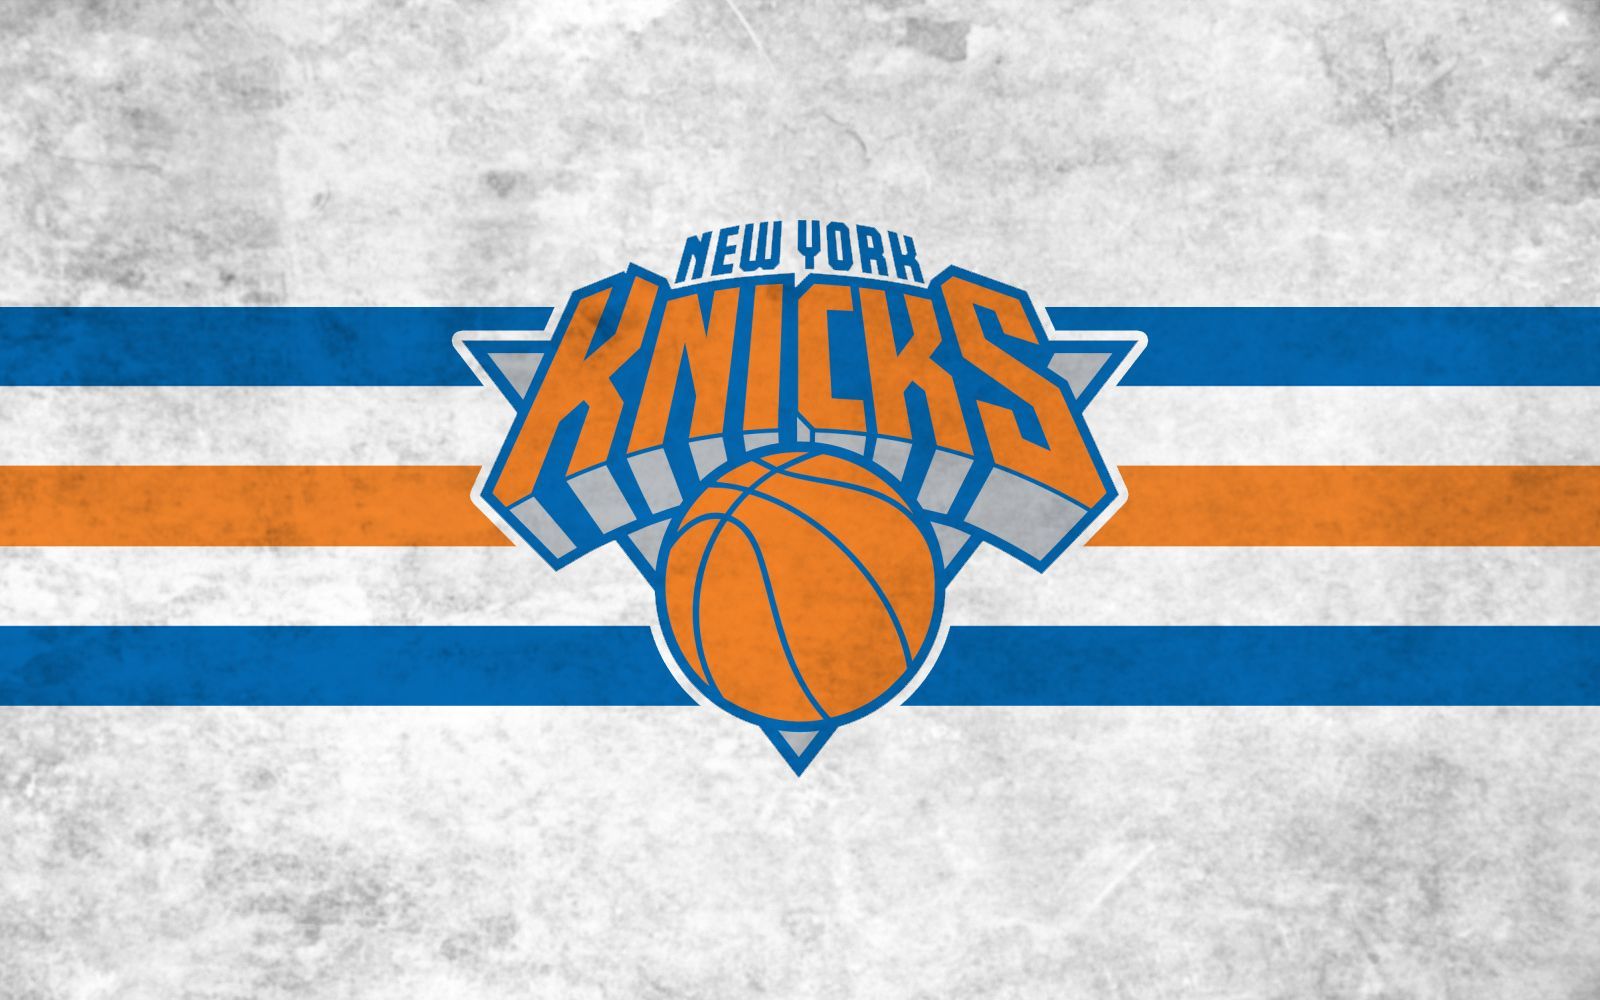 Wallpaper Of New York Knicks In Fading Grey Background Paperpull